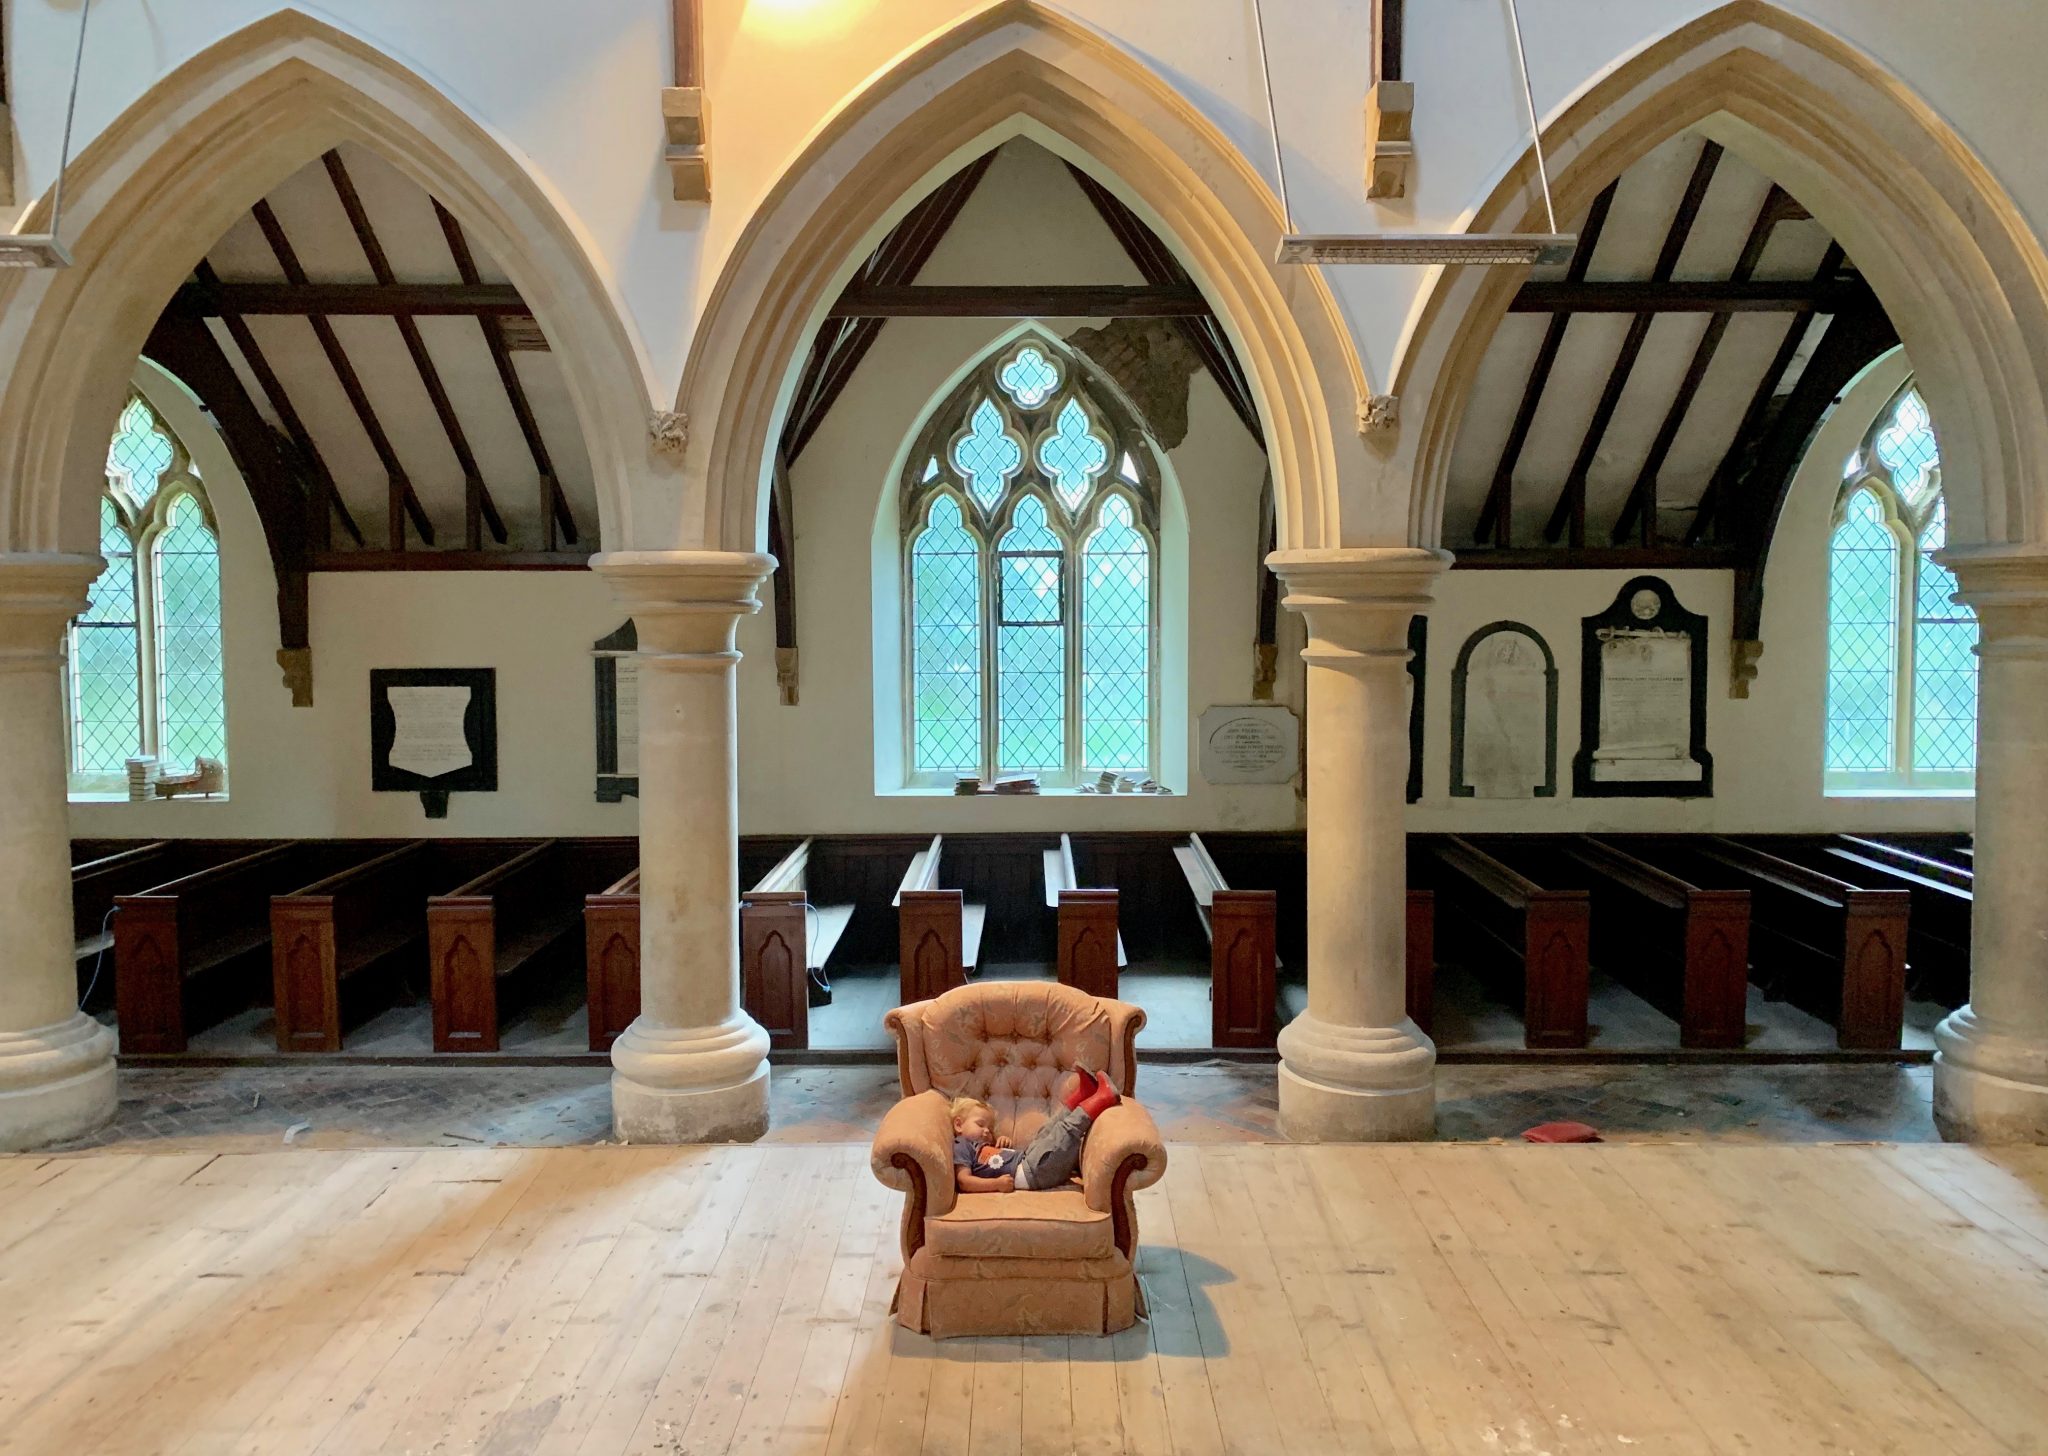 Removal Of The Pews